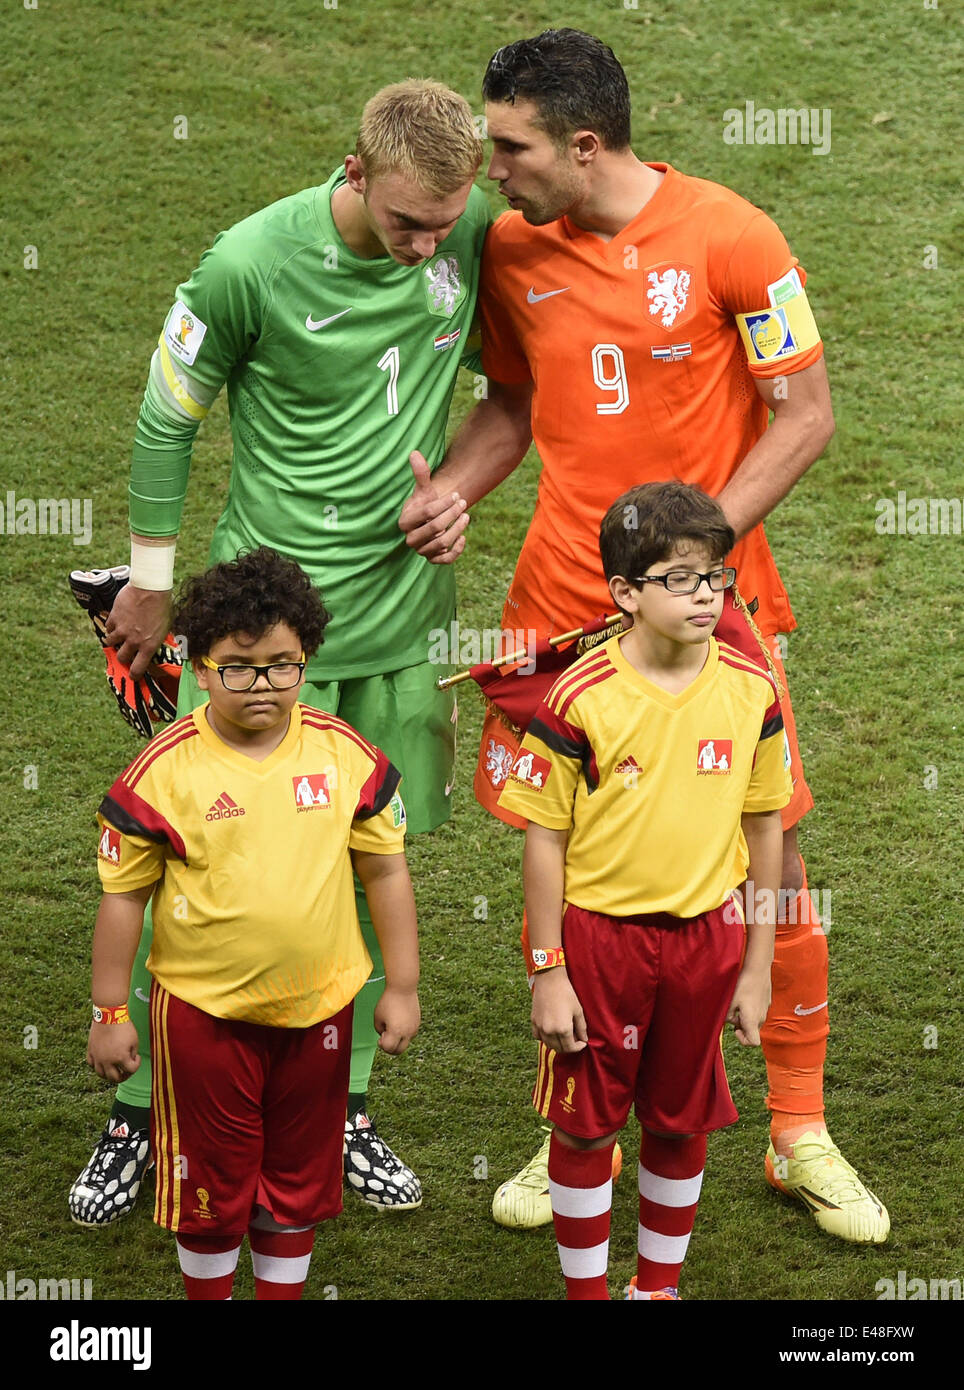 Salvador, Brazil. 5th July, 2014. Netherlands' captain Robin van Persie (R, back) speaks with goalkeeper Jasper Cillessen before a quarter-finals match between Netherlands and Costa Rica of 2014 FIFA World Cup at the Arena Fonte Nova Stadium in Salvador, Brazil, on July 5, 2014. Credit:  Yang Lei/Xinhua/Alamy Live News Stock Photo